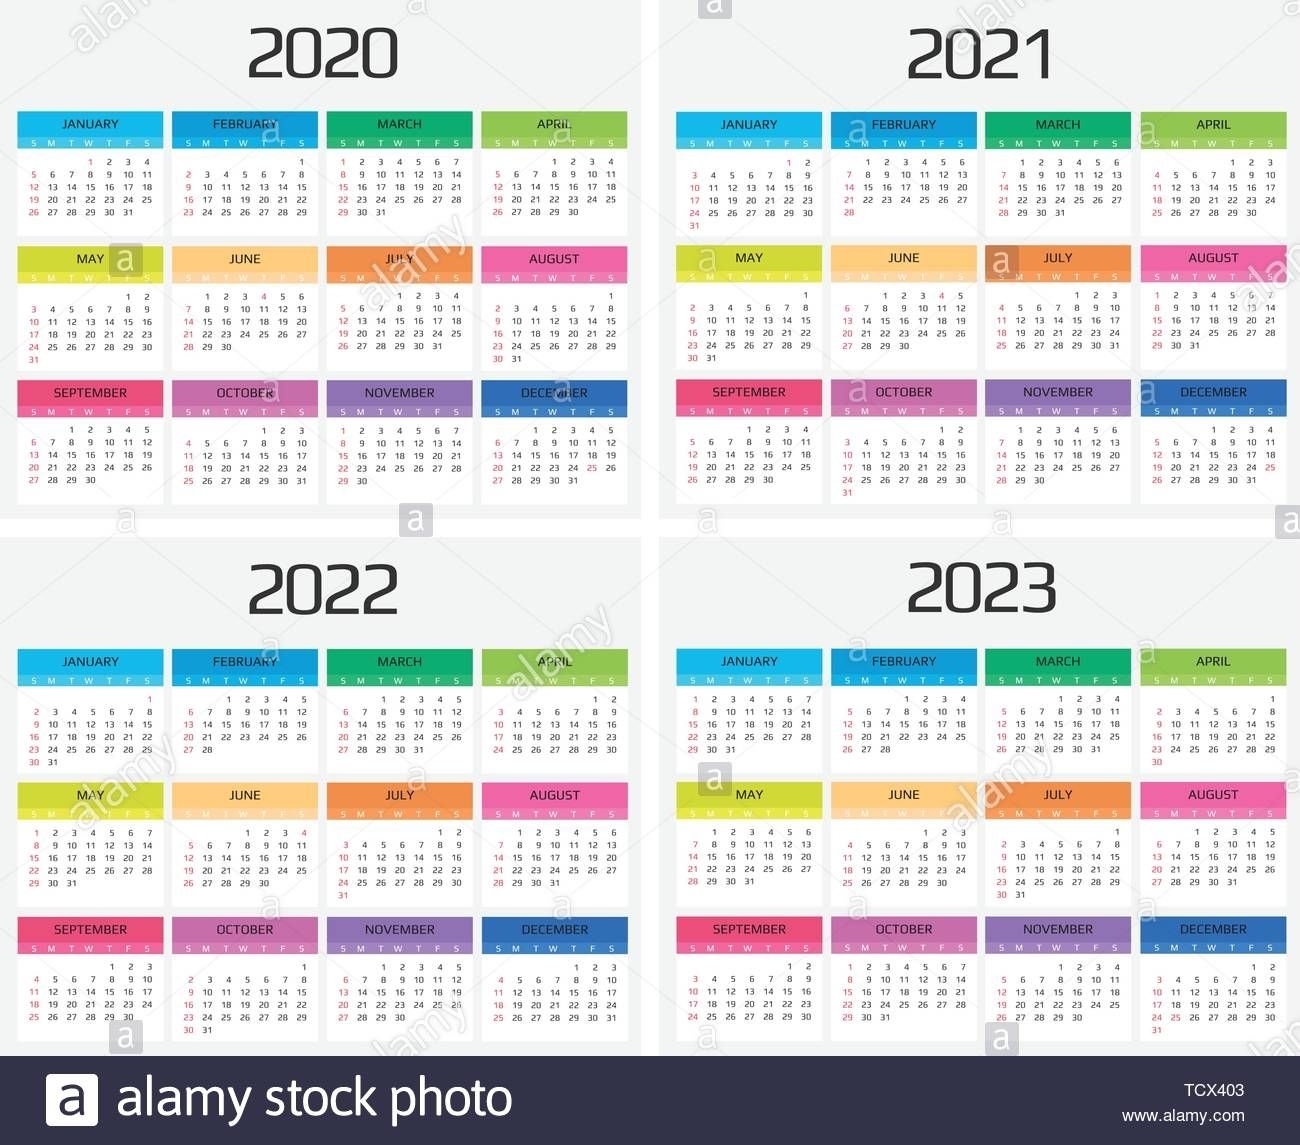 Download This Stock Vector: Calendar 2020, 2021, 2022, 2023 with Calendars 2020 2021 2022 2023